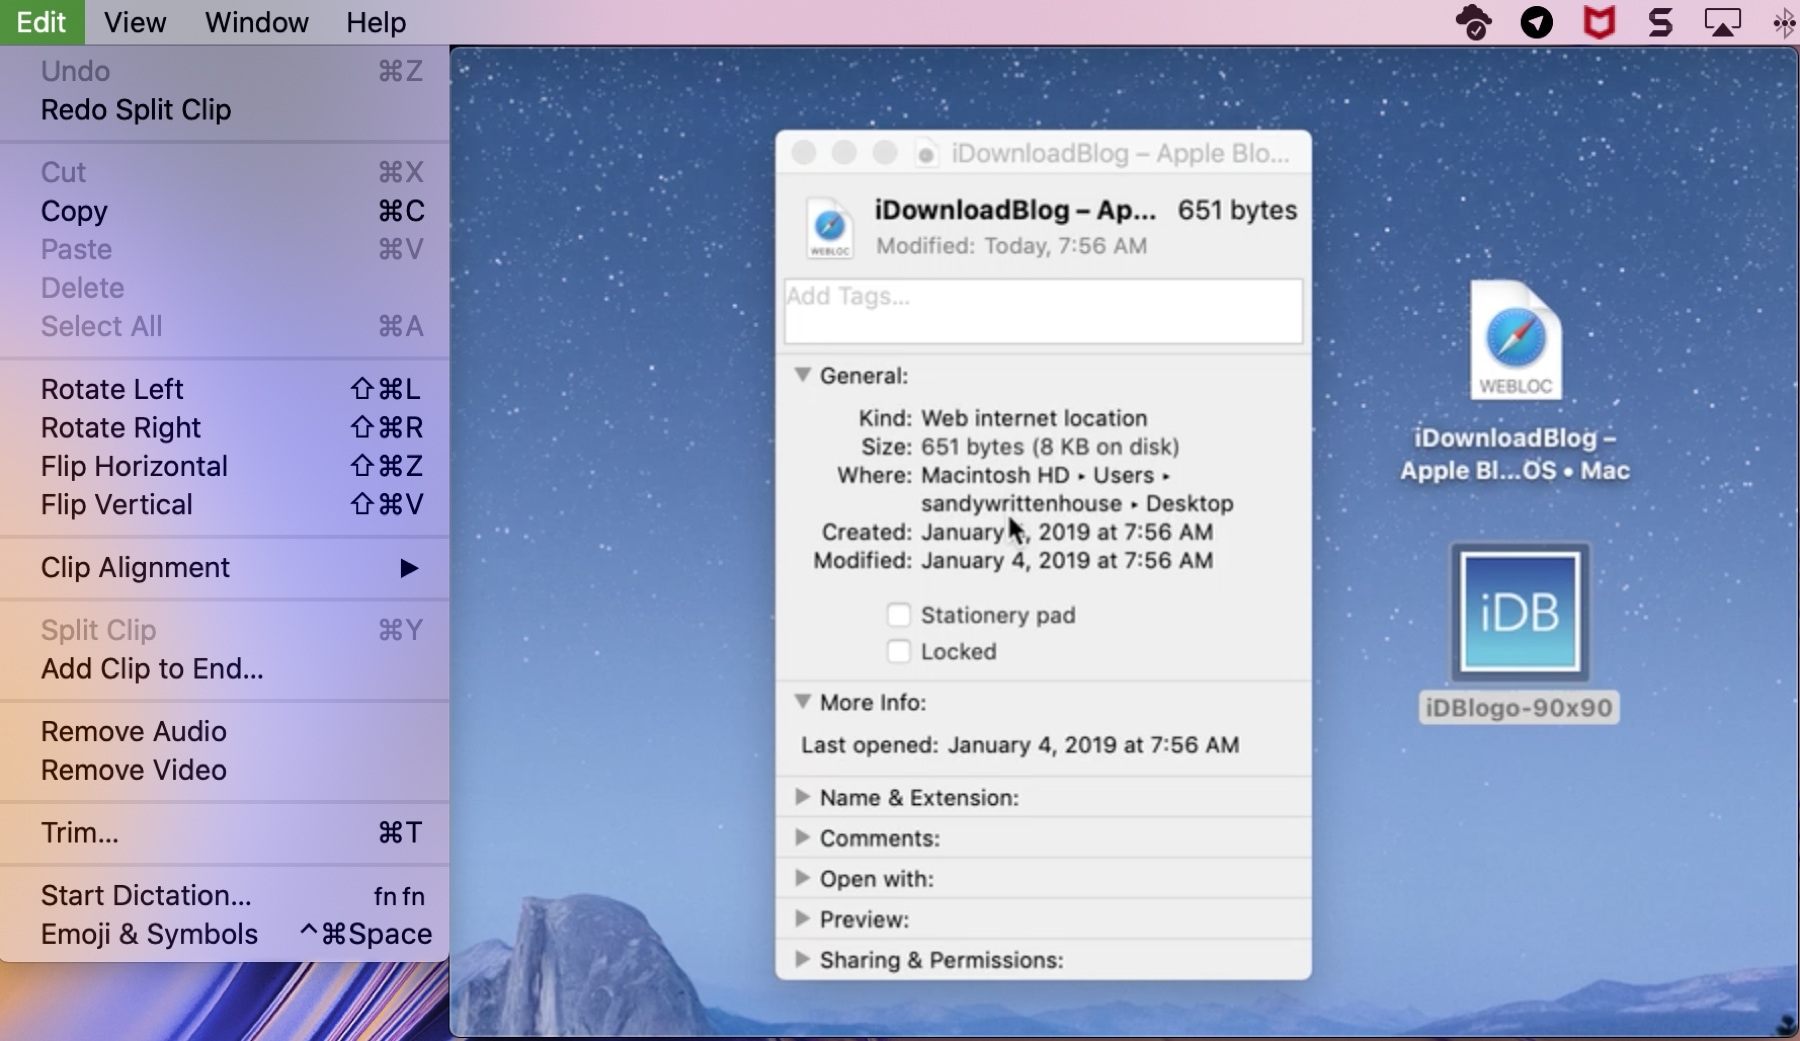 quicktime player for mac os x yosemite